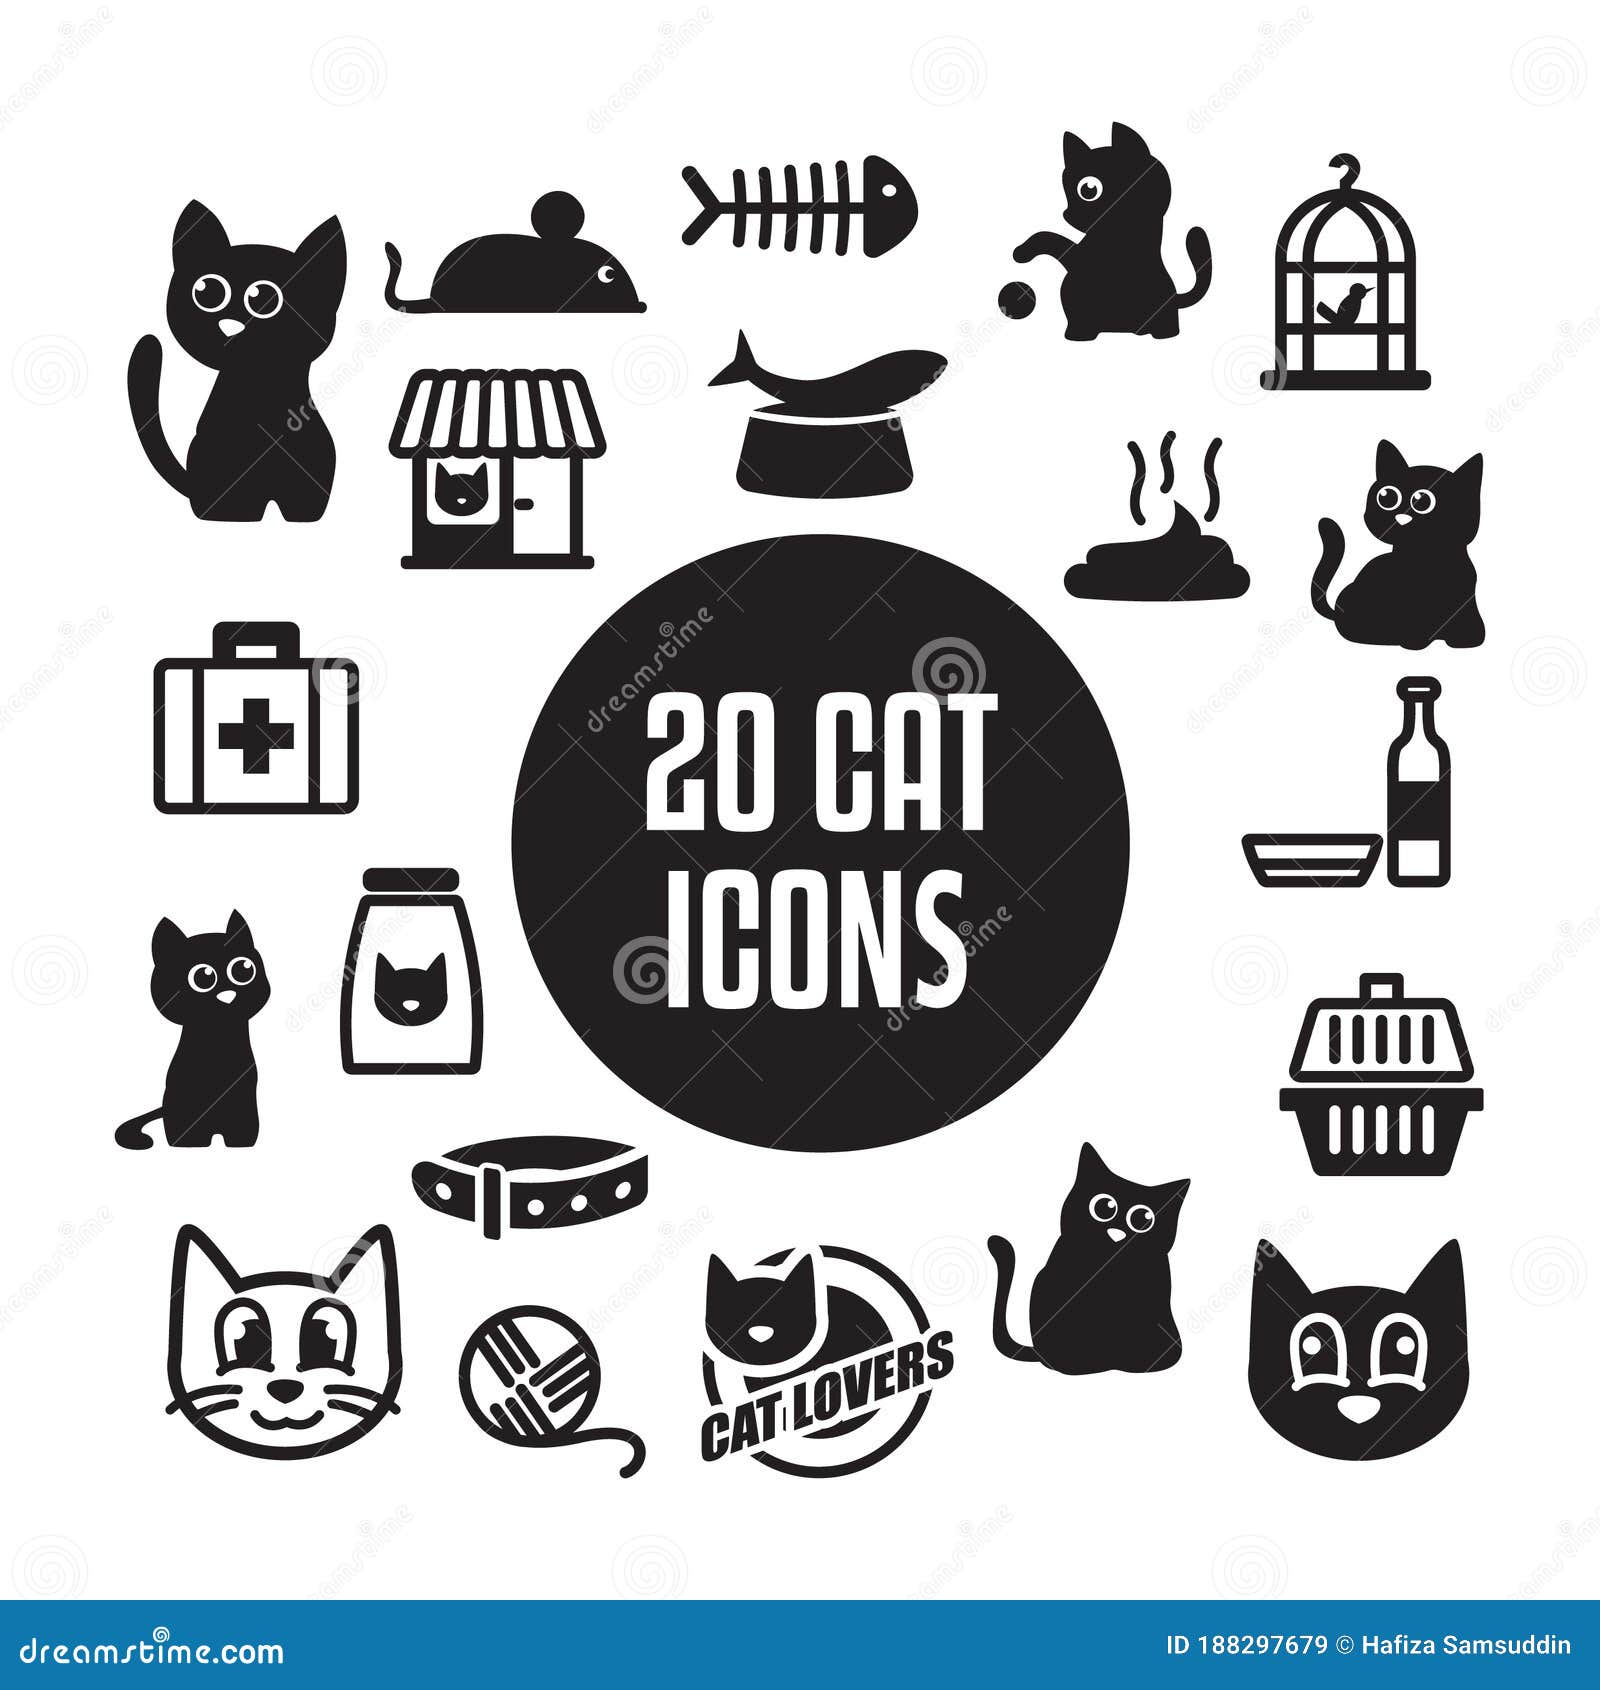 Free Vector  Cat icons collection